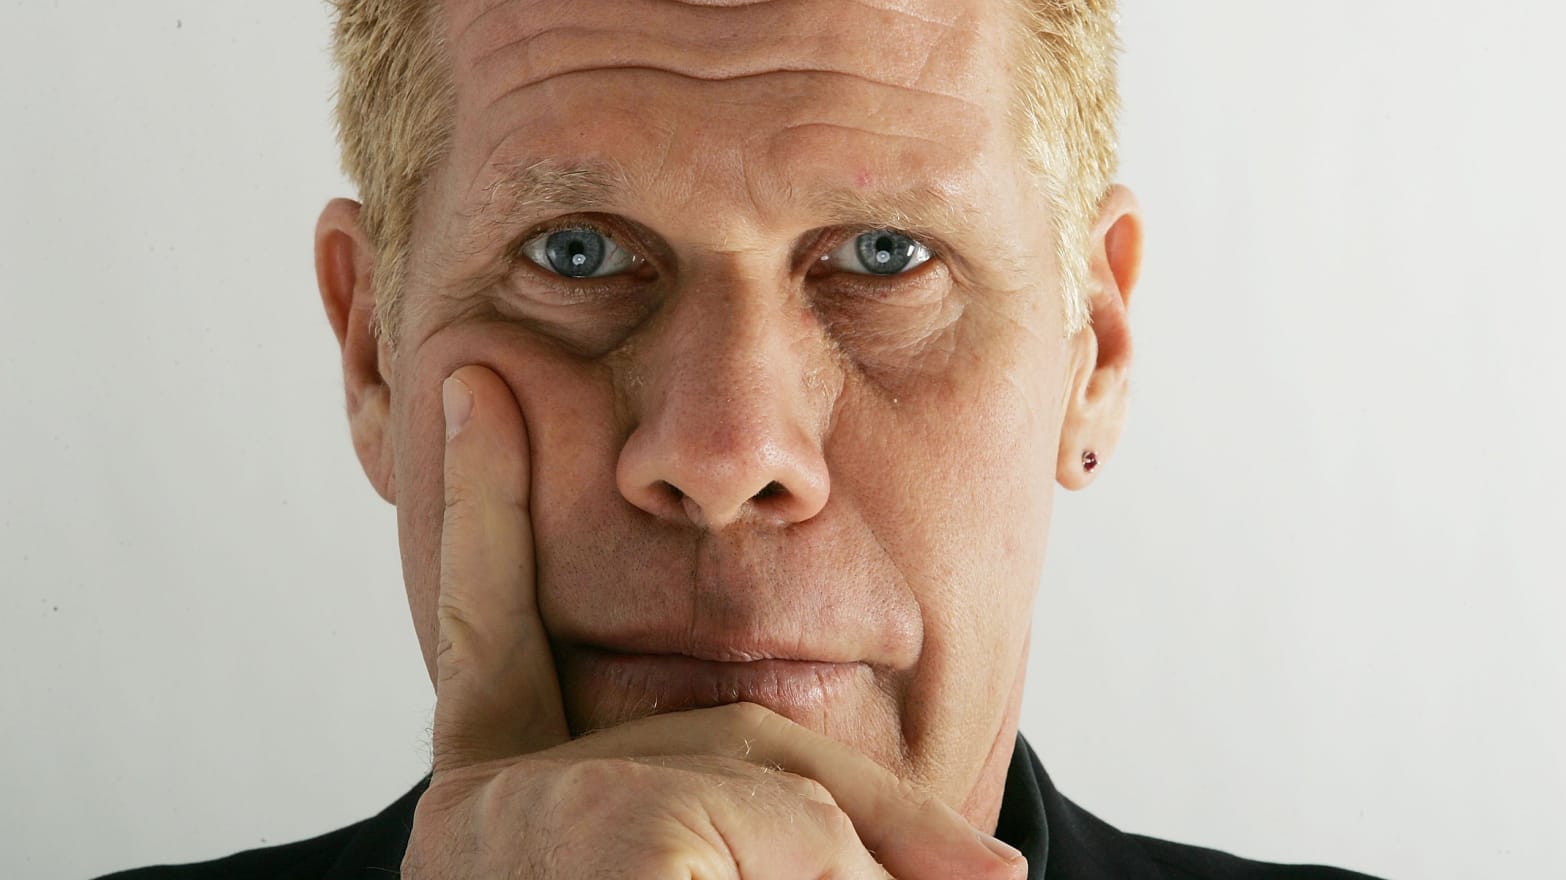 Ron Perlman Face Disease: Is Something Wrong With His Face? 